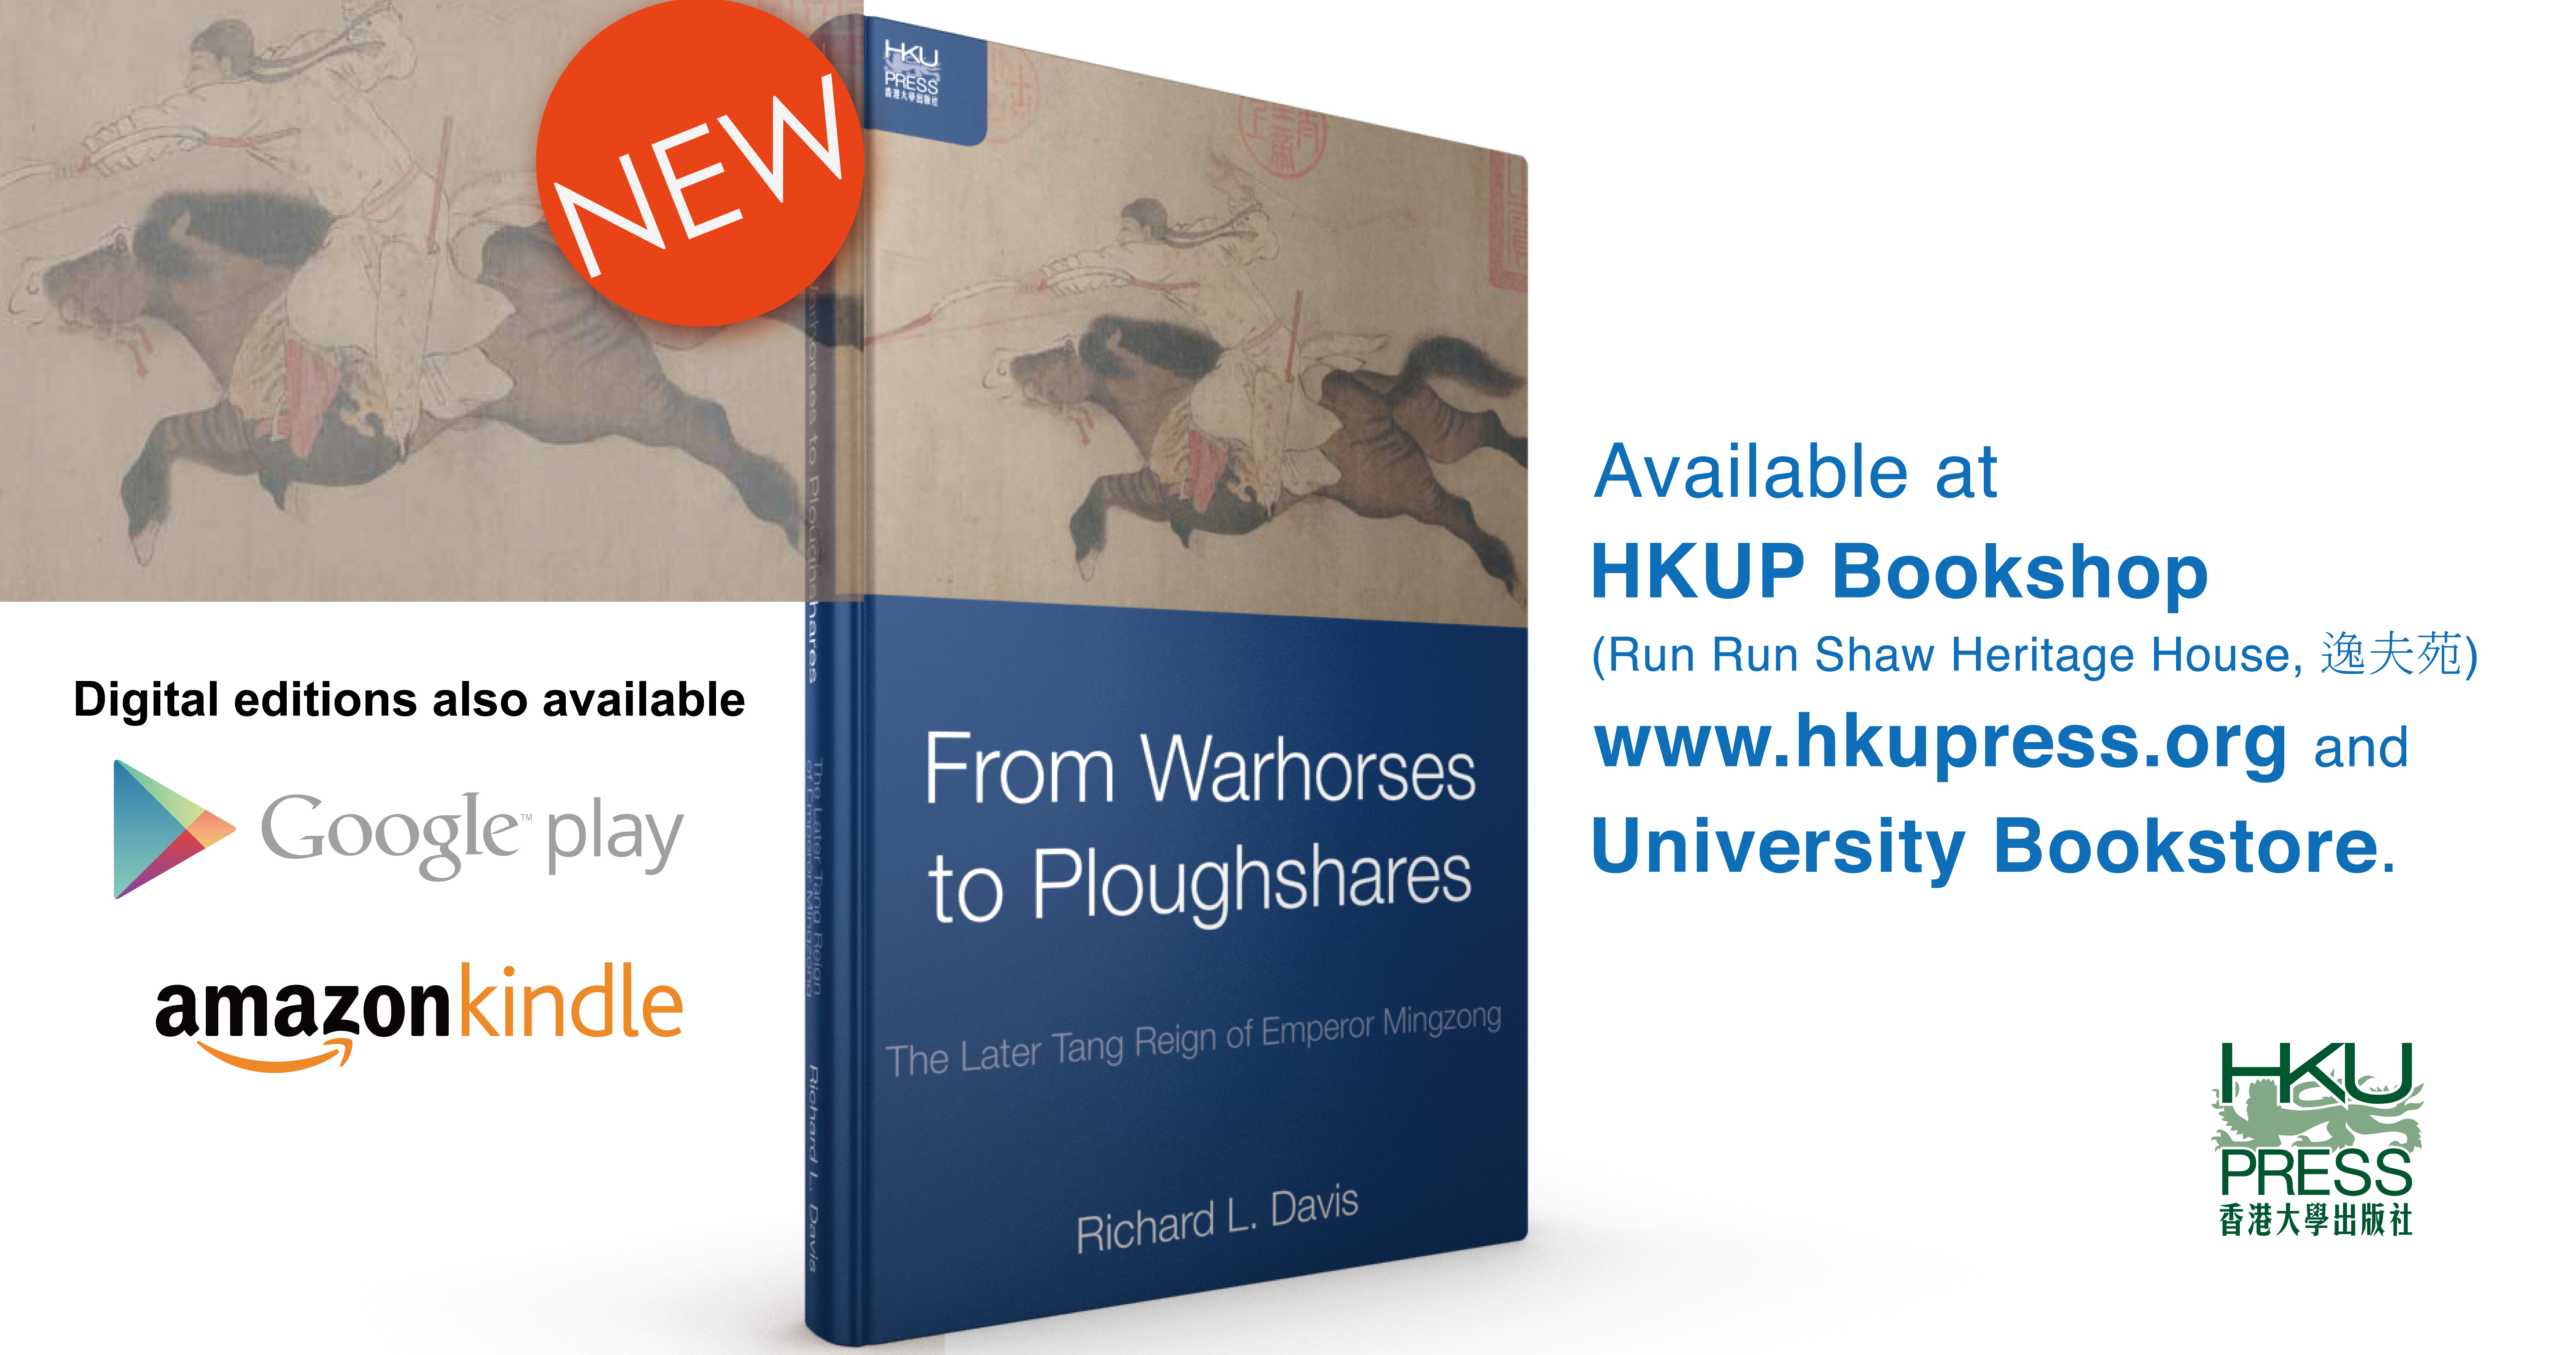 NEW BOOK - From Warhorses to Ploughshares